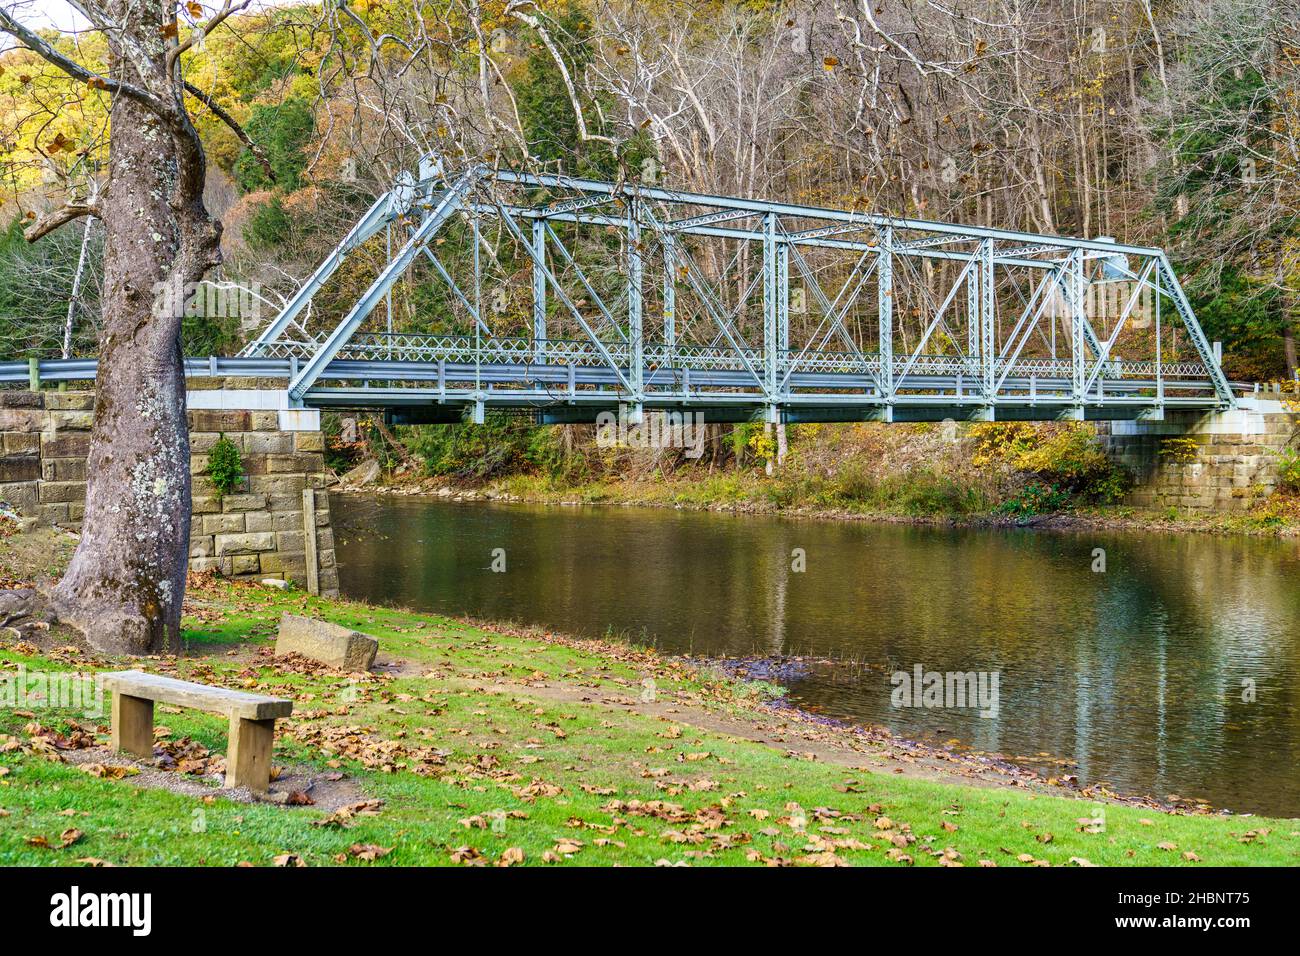 The Echo Dell Road one lane bridge over Beaver Creek in Beaver Creek State Park located in East Liverpool, Ohio. Stock Photo